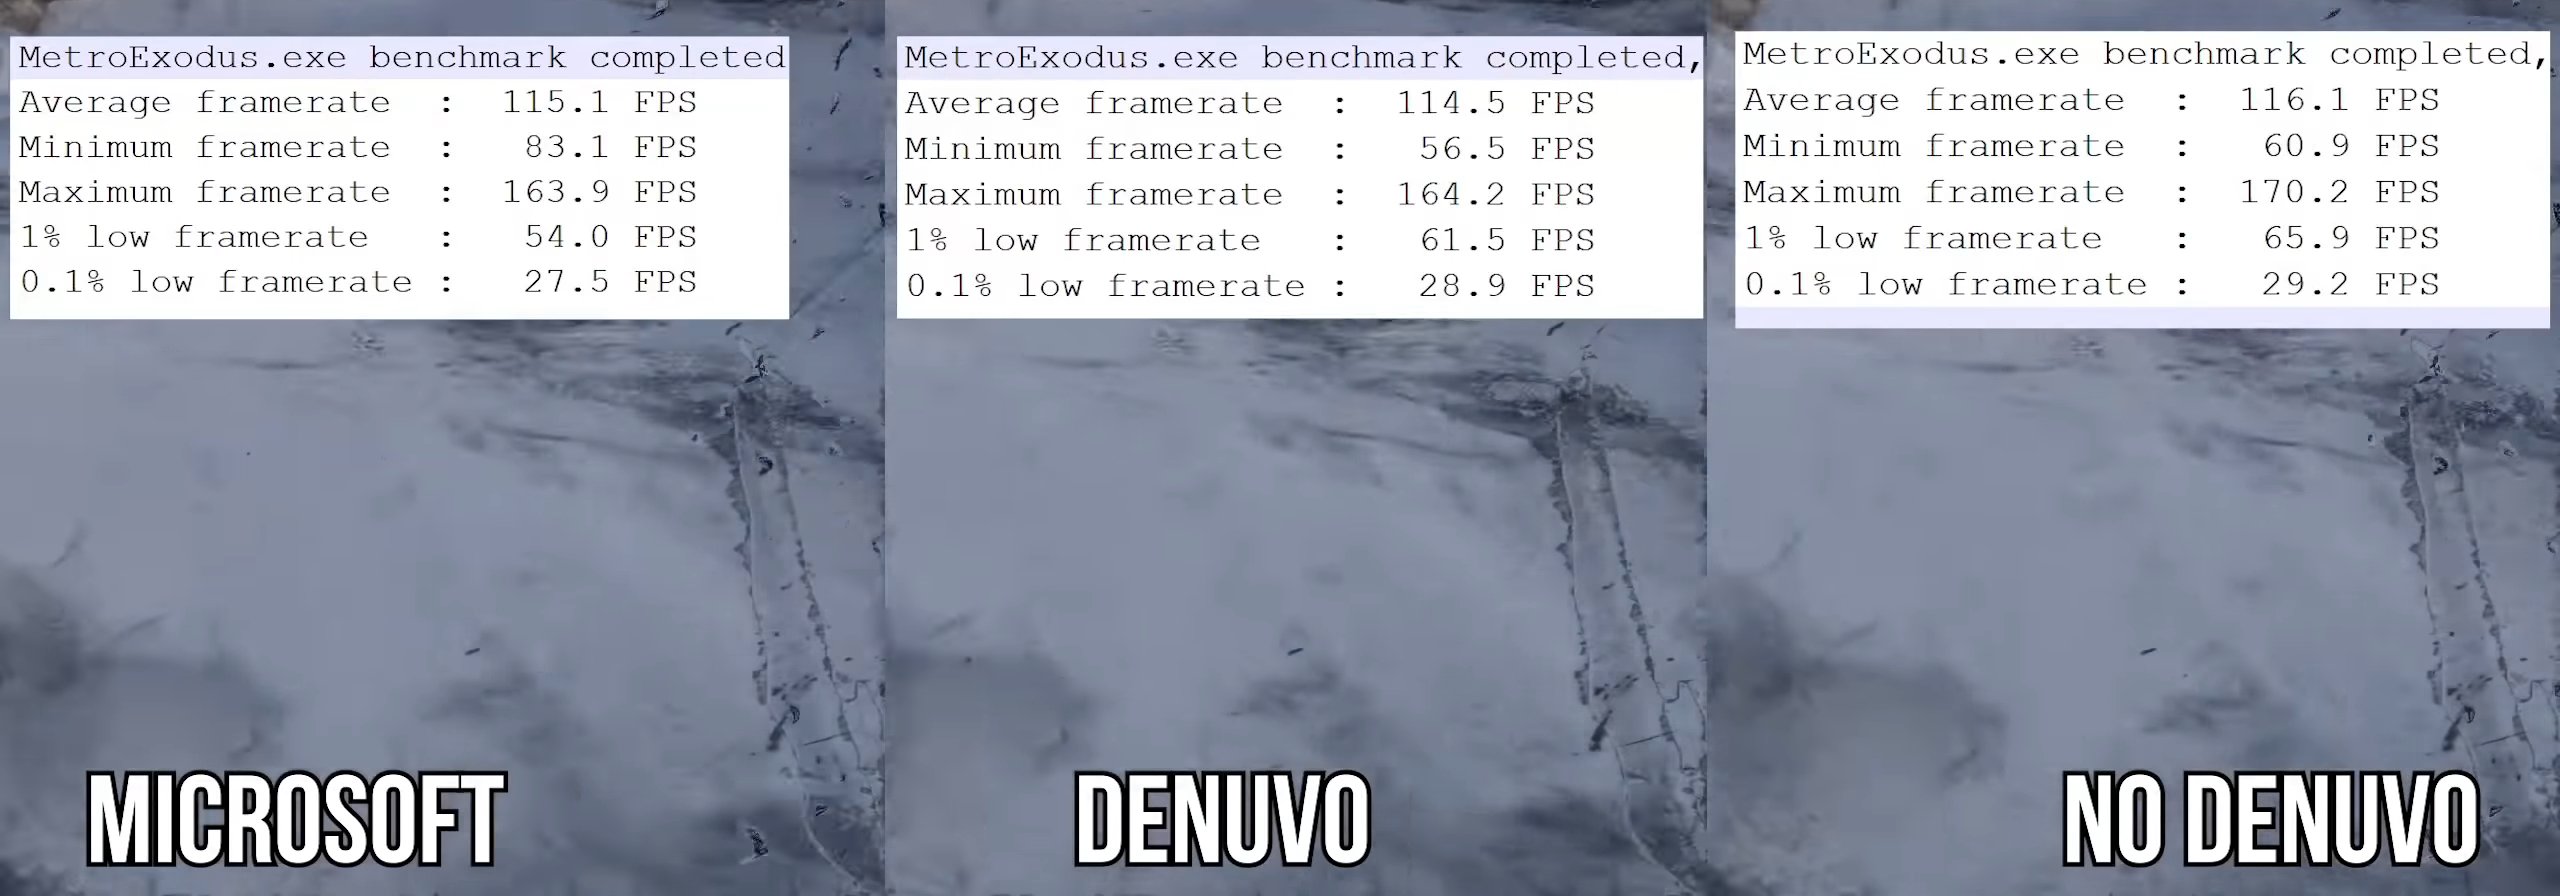 125433-Did%20Denuvo%20slow%20performance